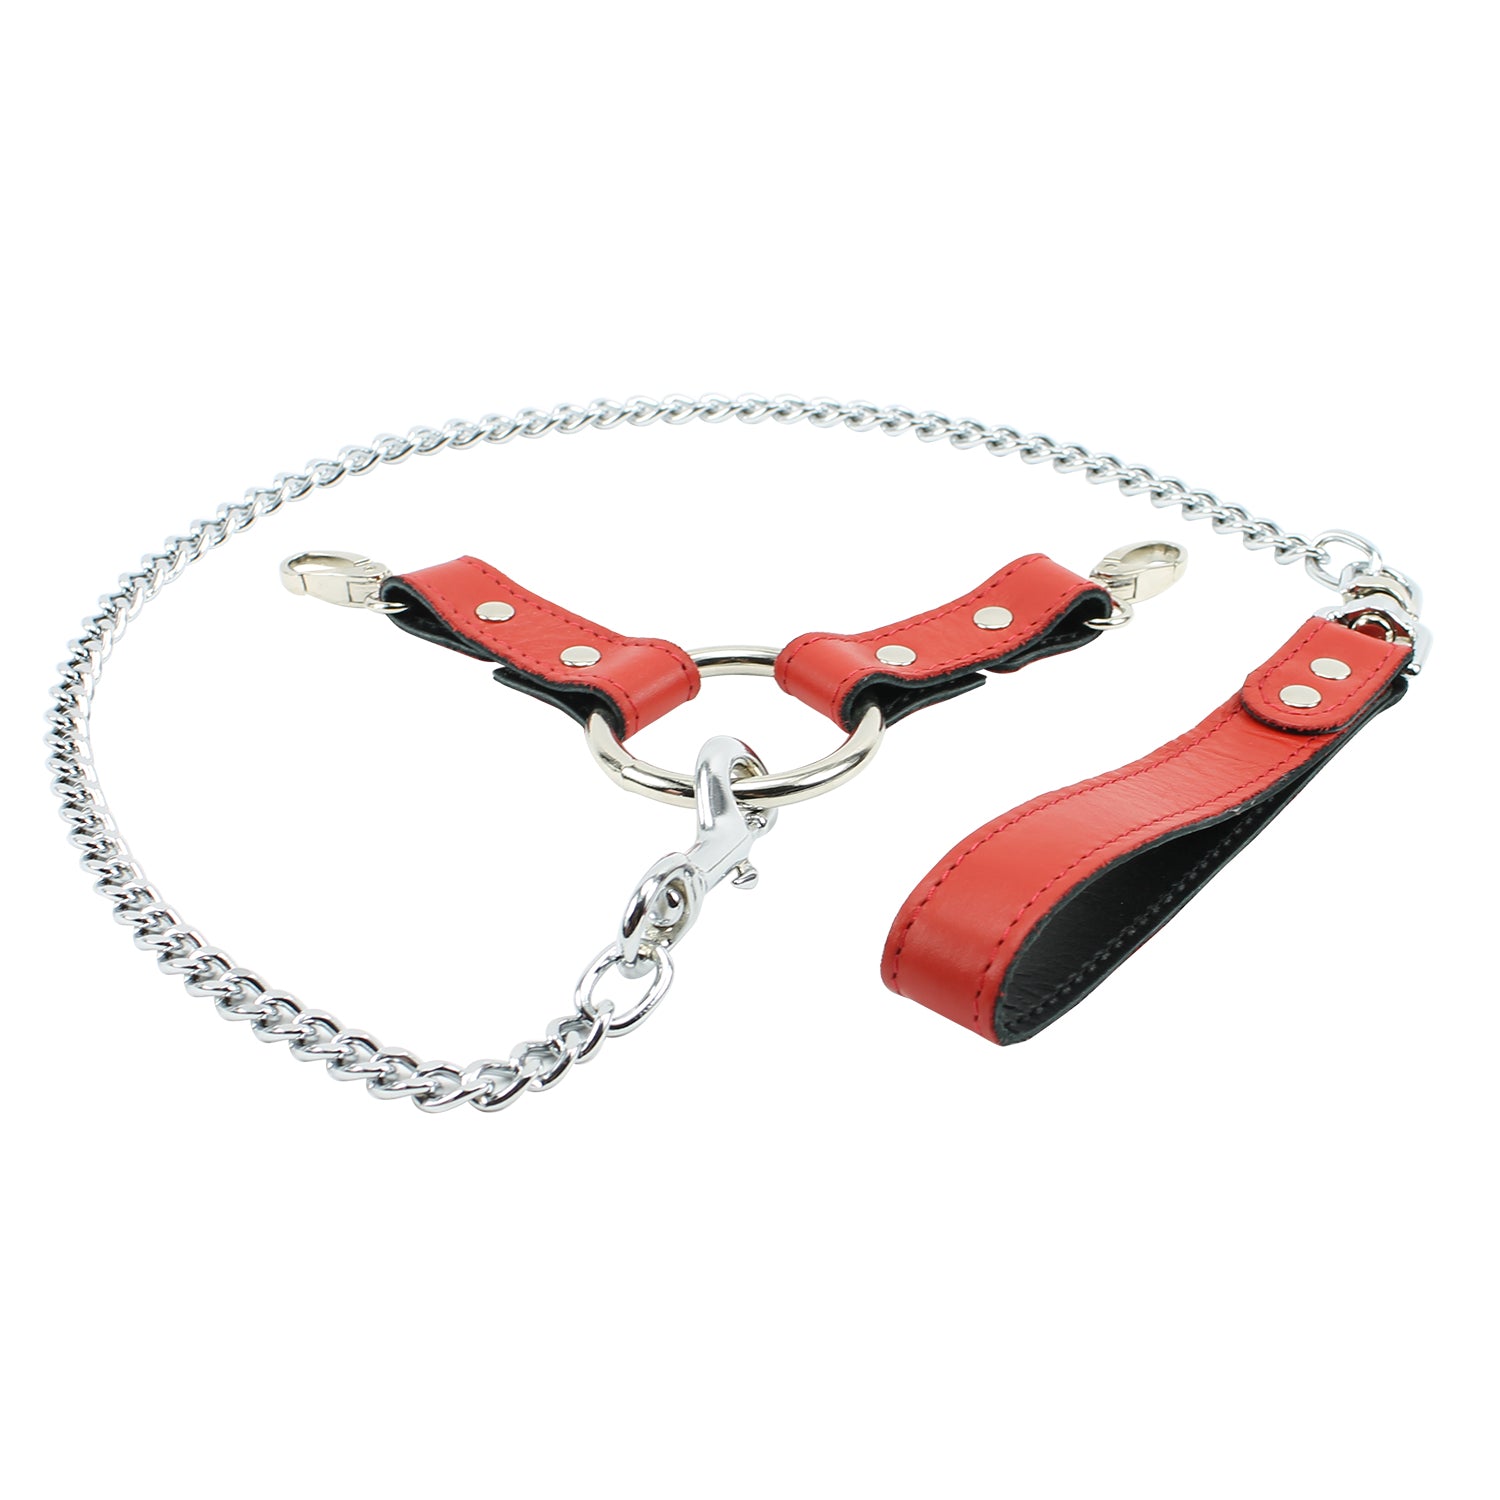 Berlin BDSM Chain Lead Leather Handle Hogtie Red